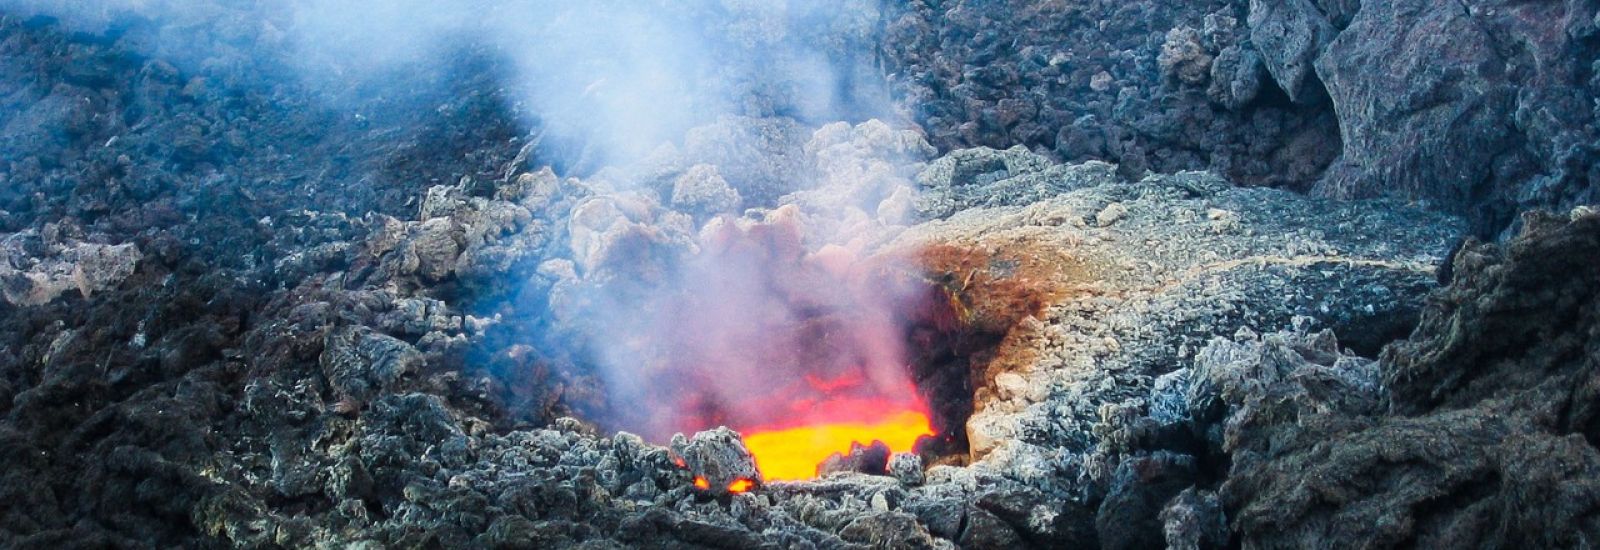 A smouldering, volcanic hole, with lava flowing inside it.